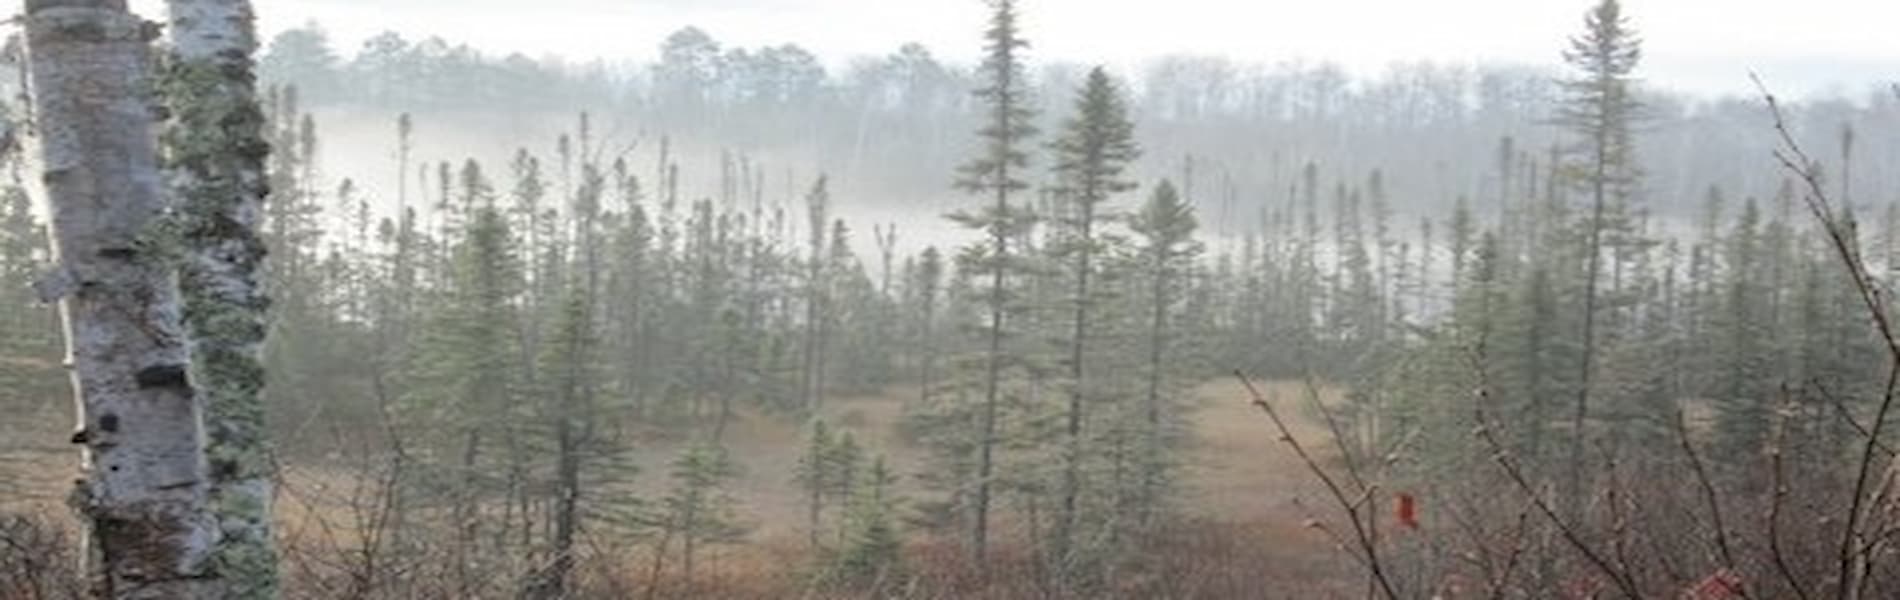 misty-pines-in-a-morning-fog